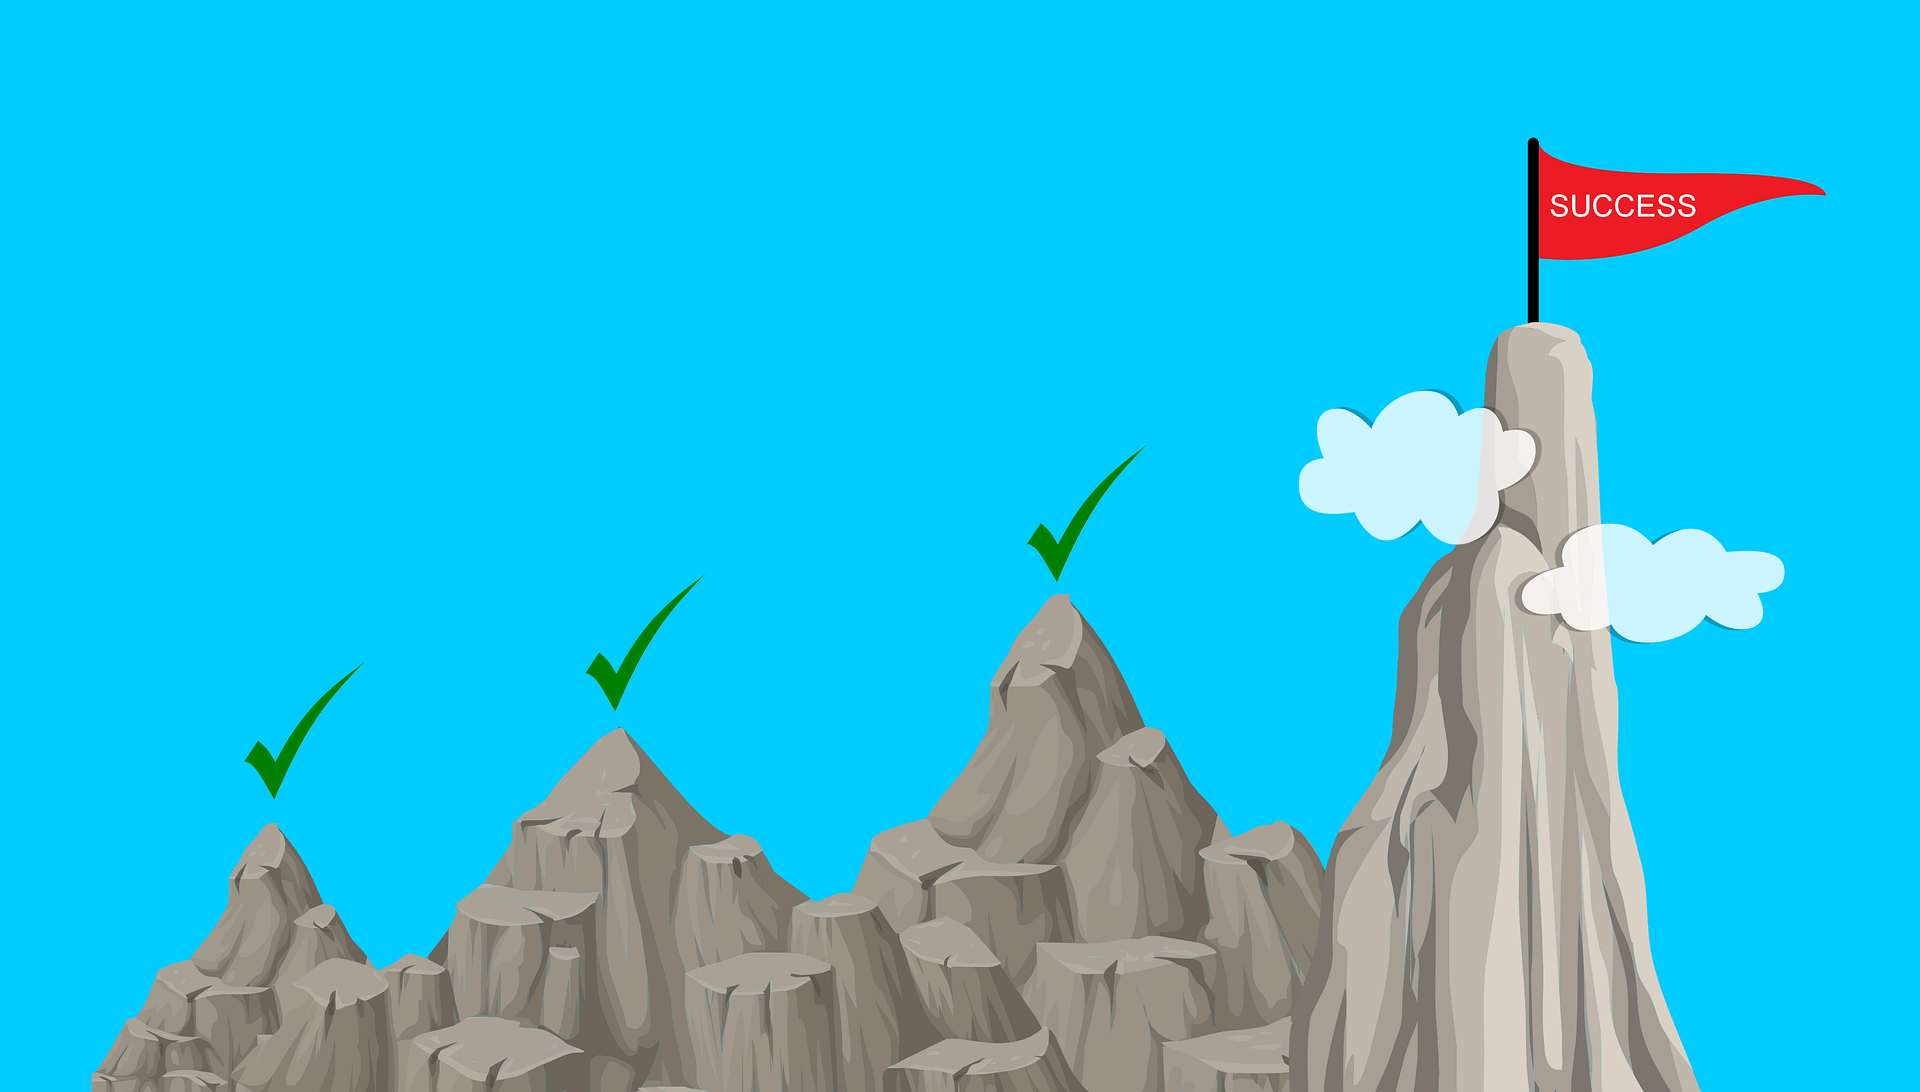 series of growing mountains with "Success" at the top of the highest peak